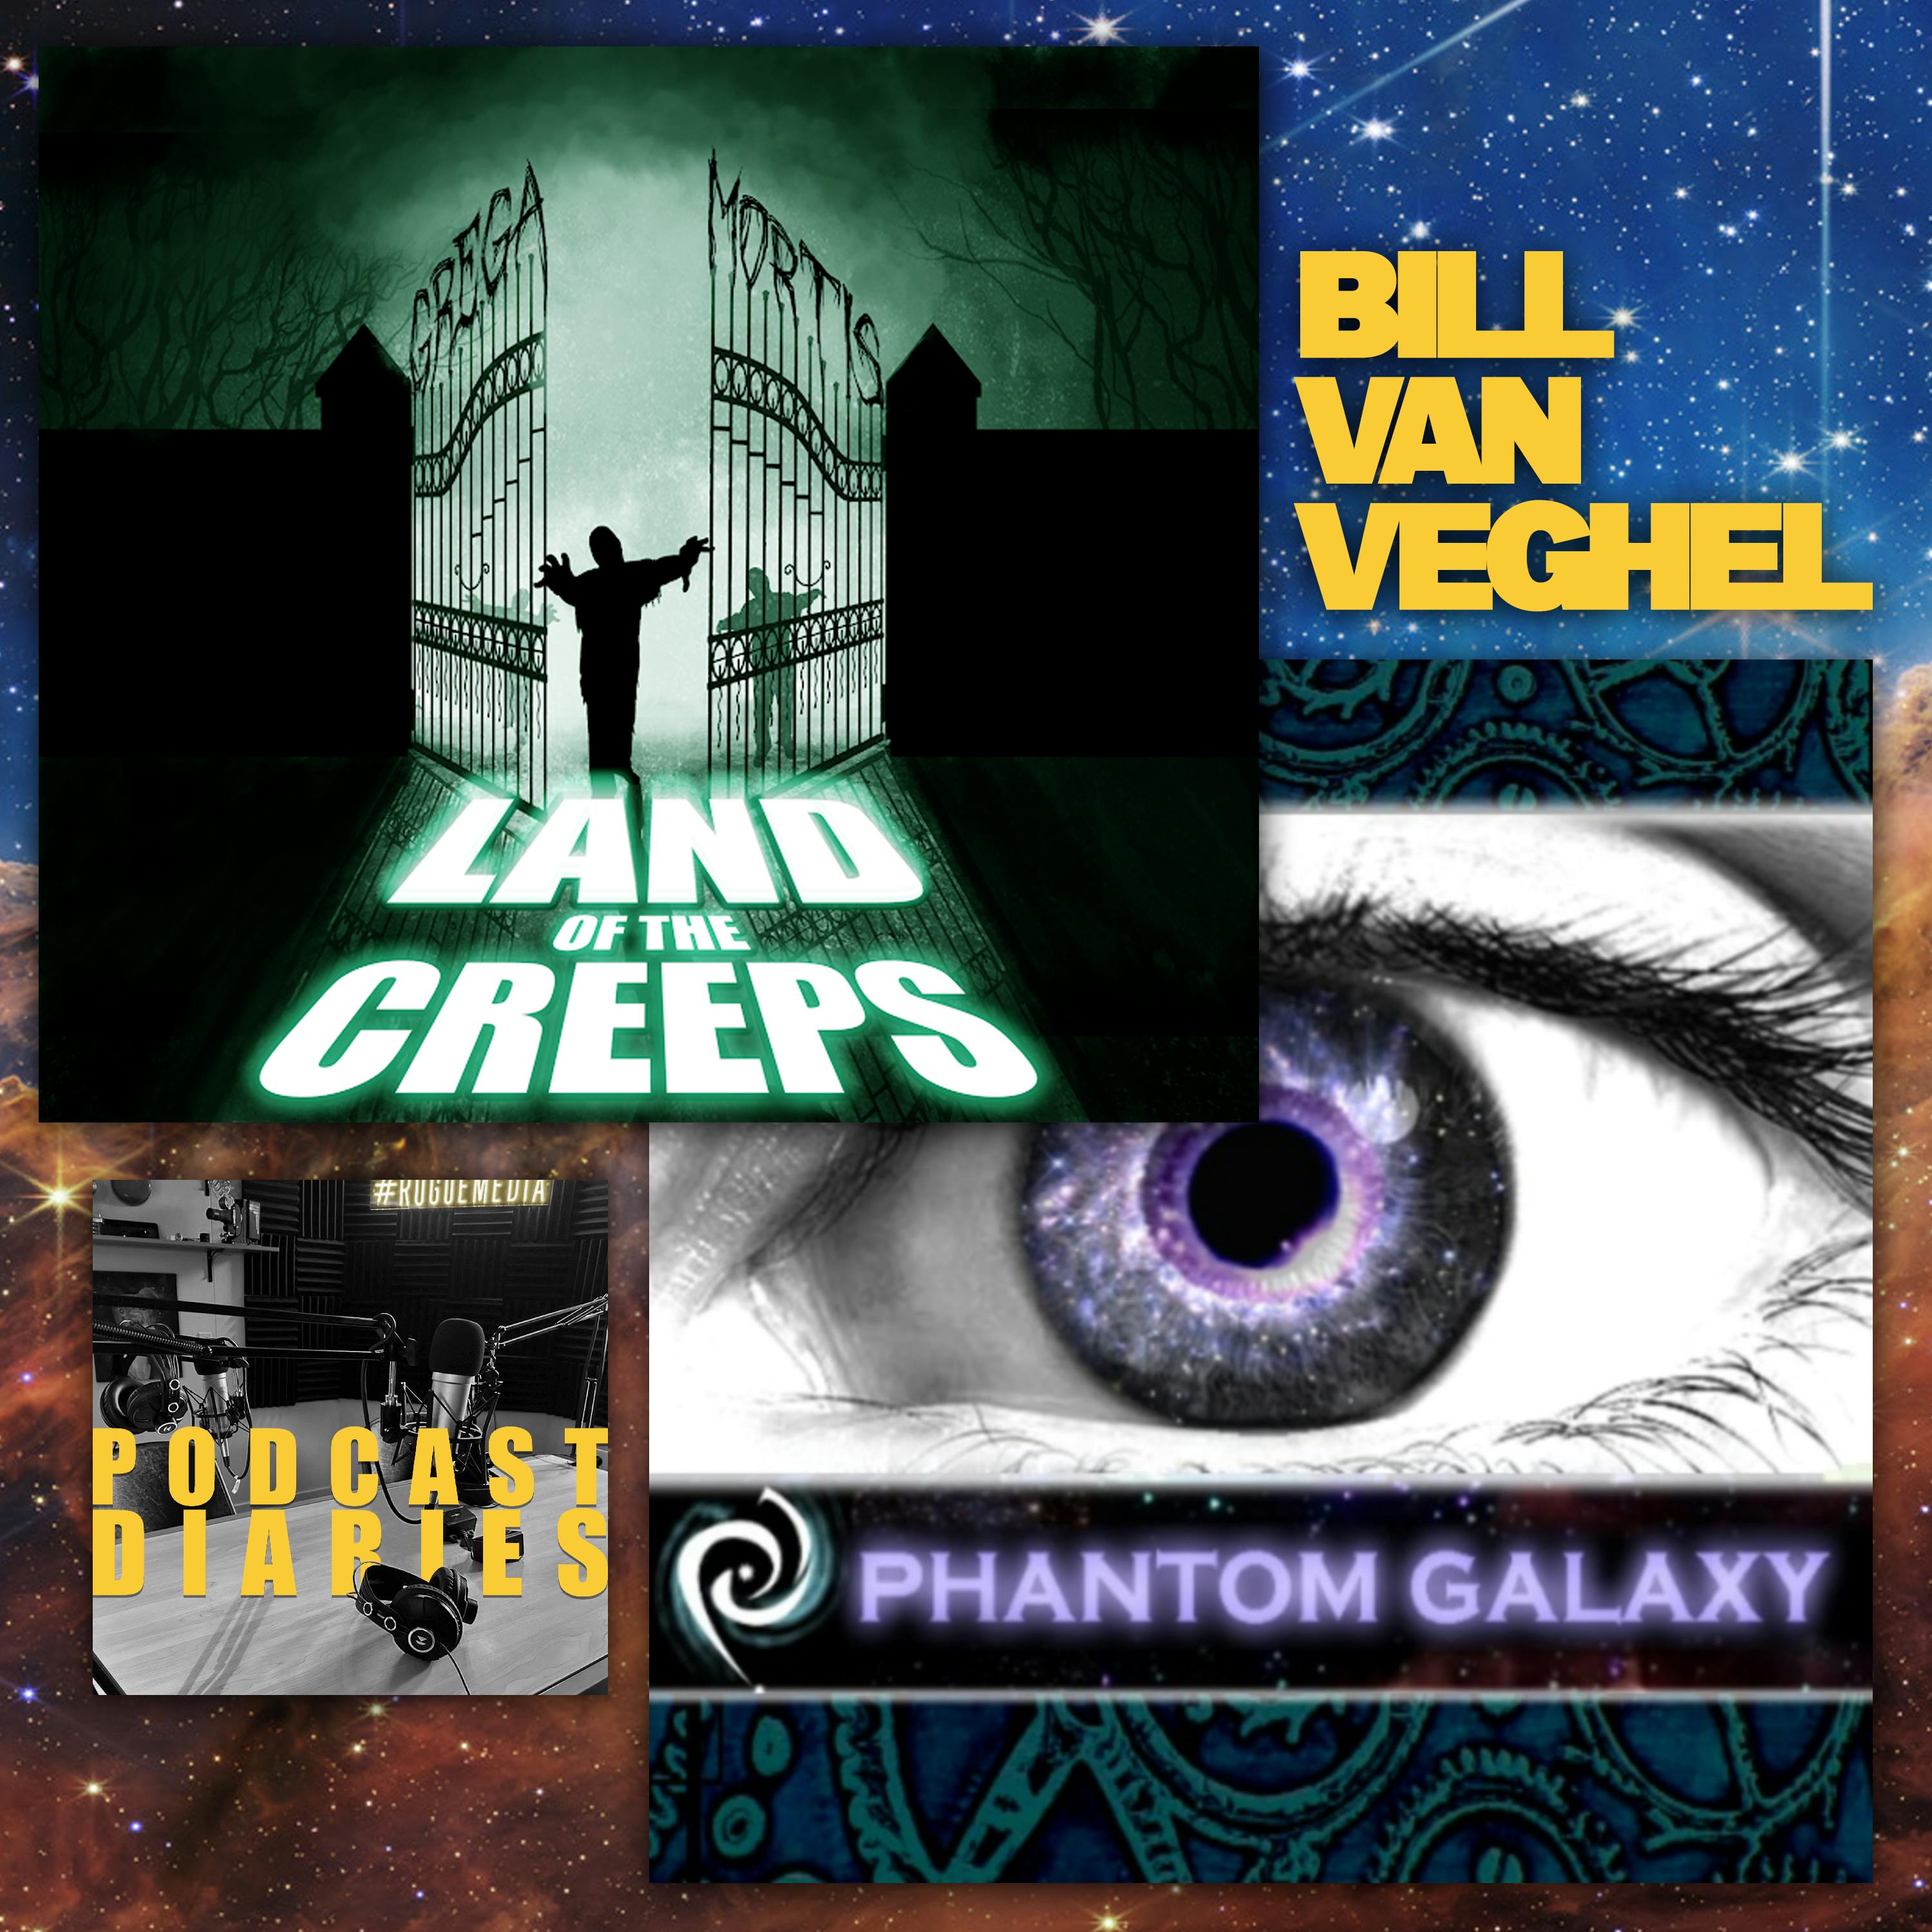 Bill Van Veghel with Land of the Creeps and Phantom Galaxy Podcasts